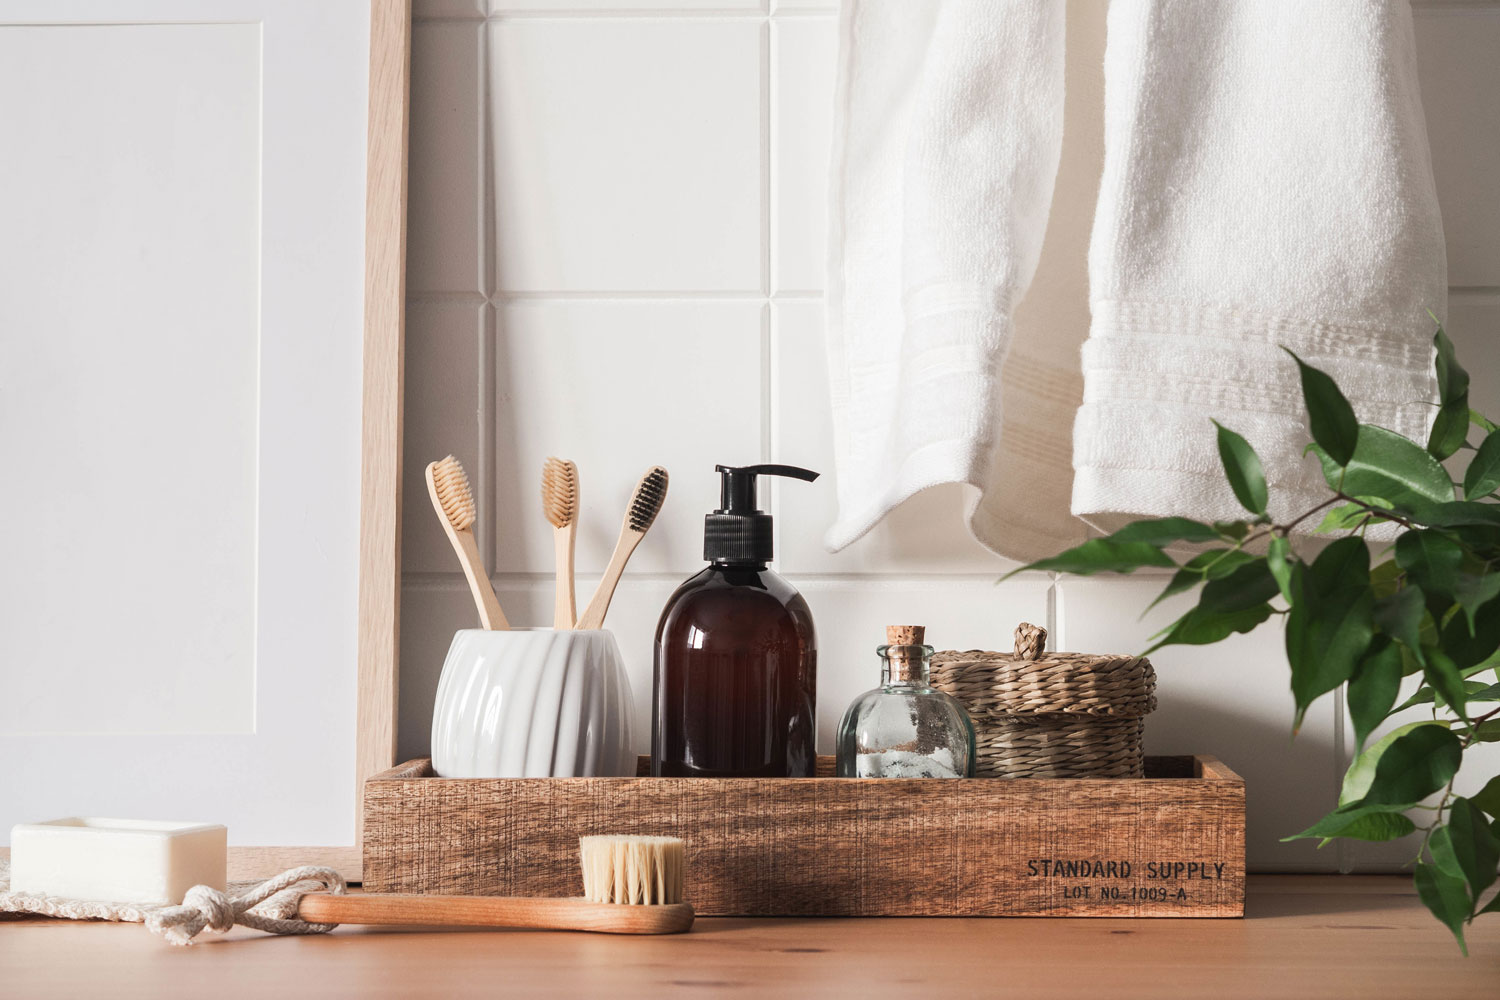 A wooden container for bathroom and grooming essentials